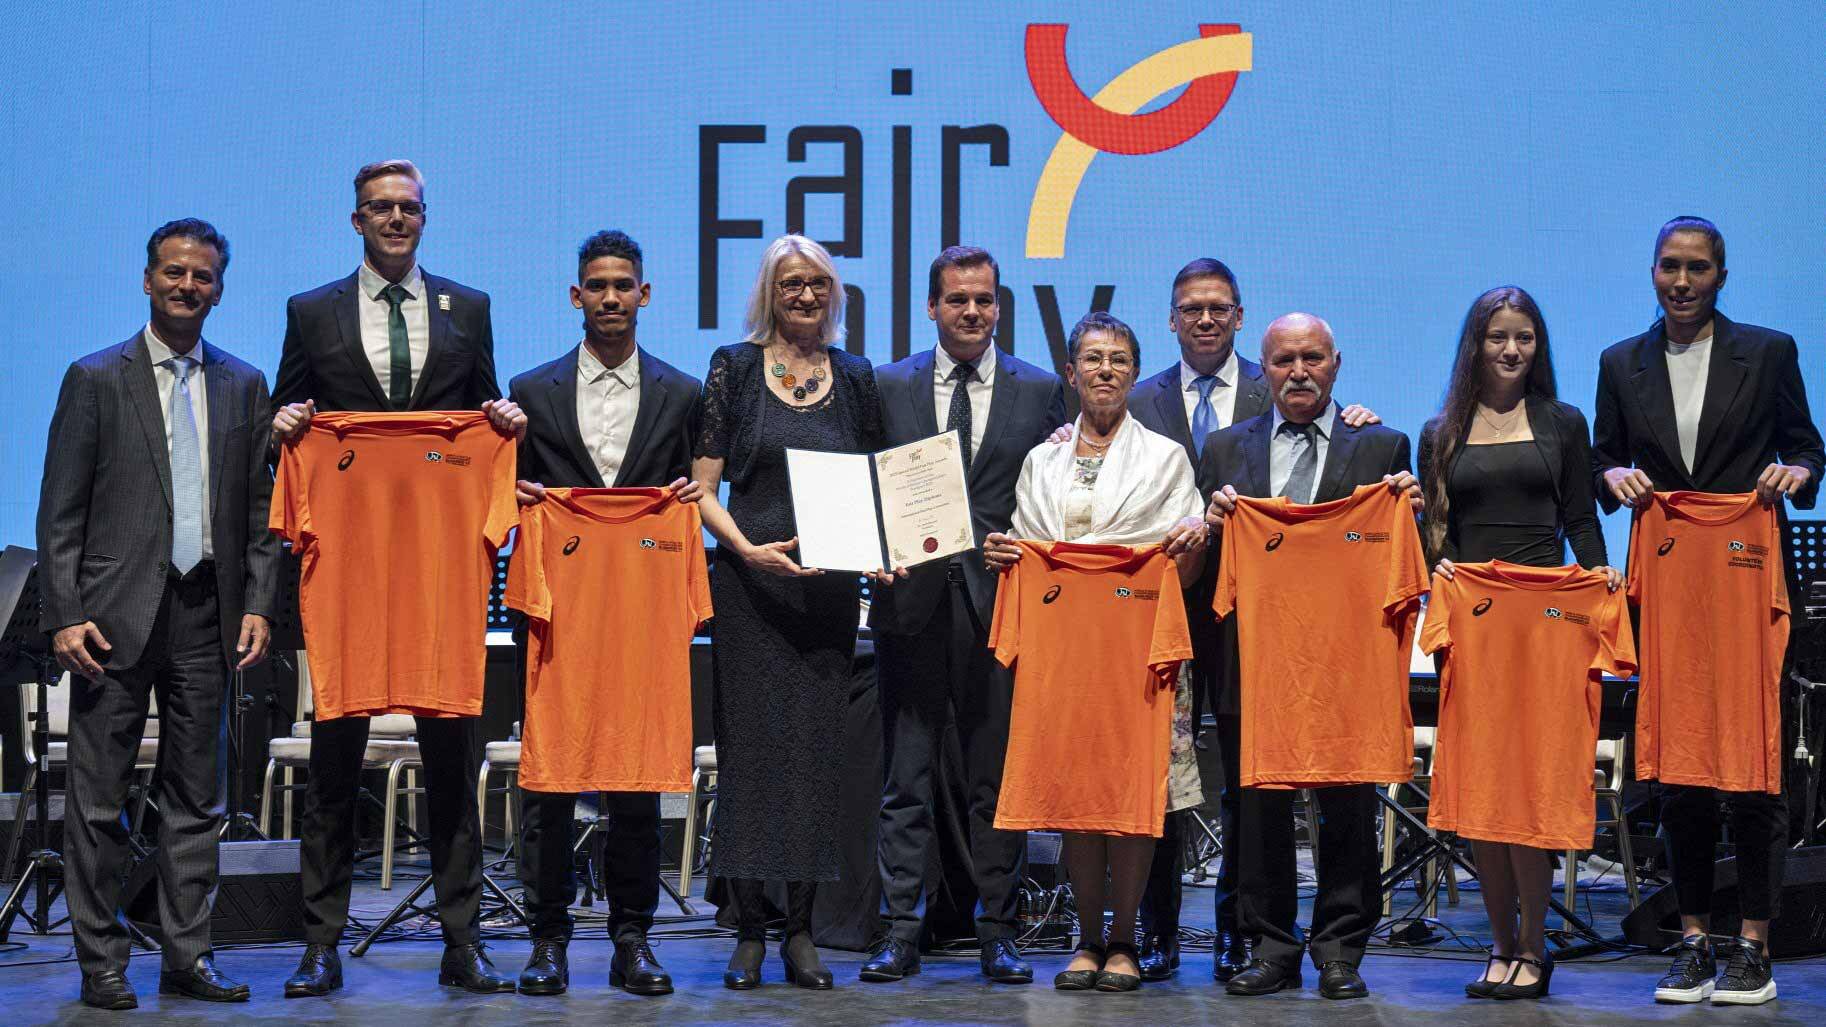 International Fair Play Award for the Volunteers of the World Athletics Championship!